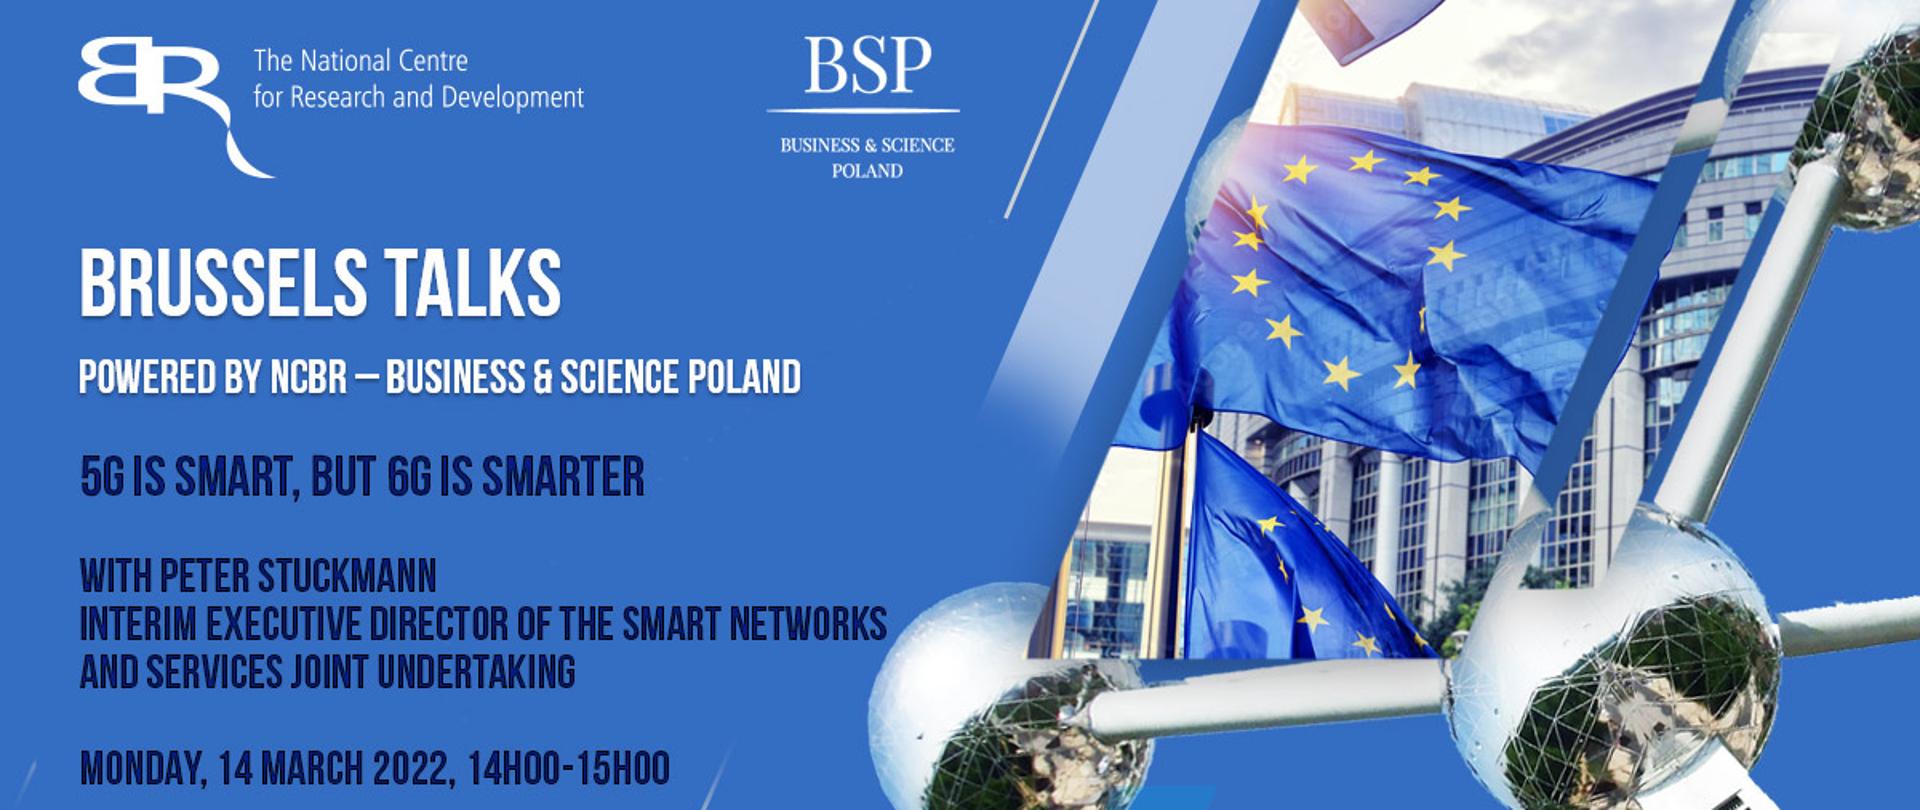 5G is smart, but 6G is smarter - Brussels Talks on Smart Networks and Services